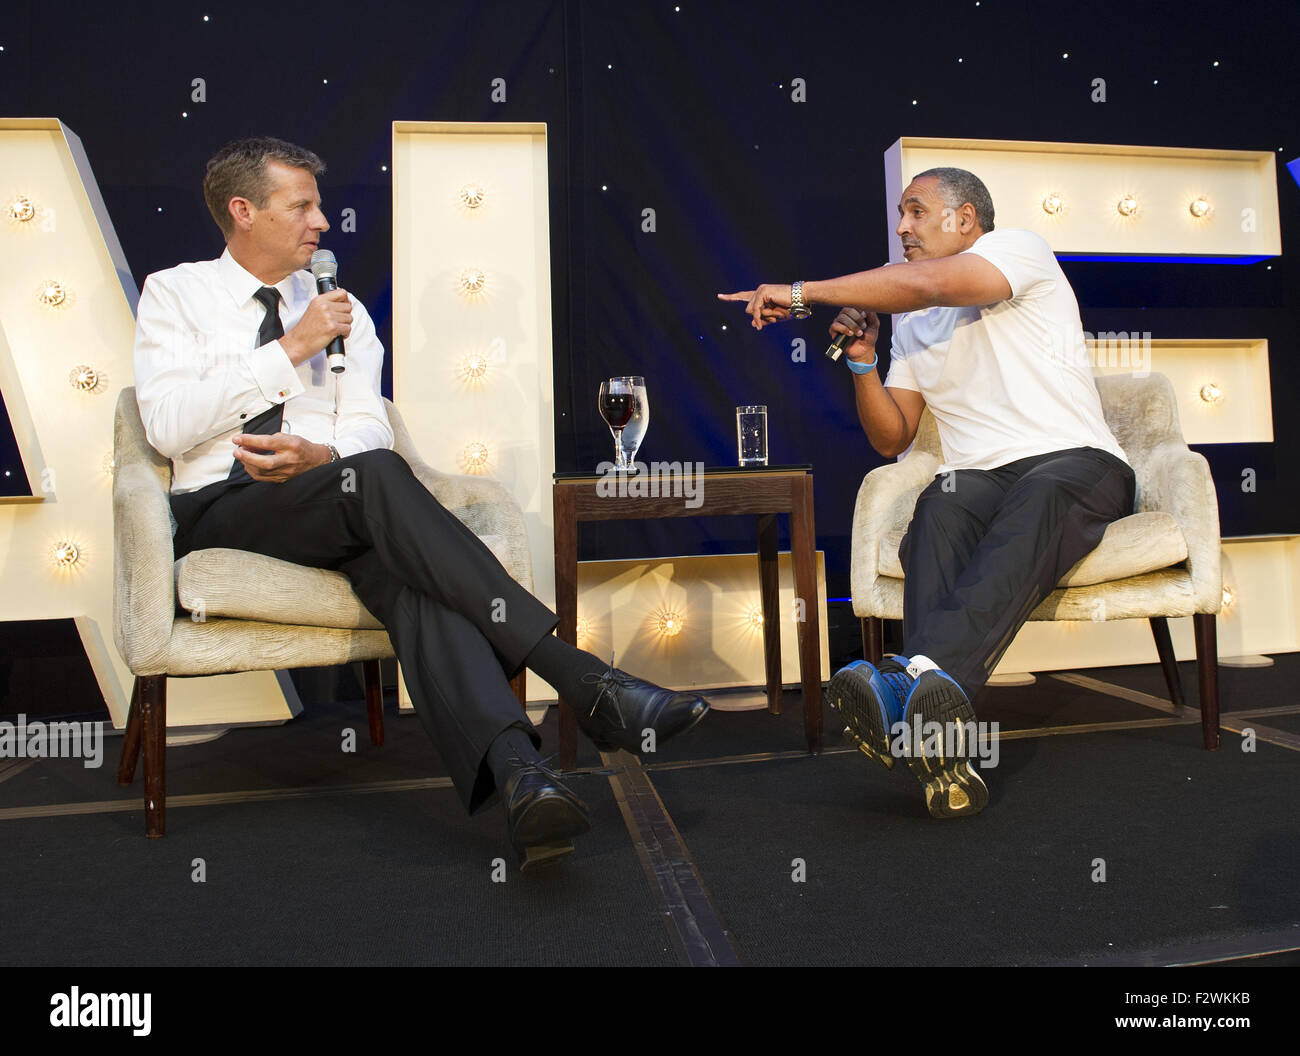 'An Audience With Daley' event in aid of the charity Coco held at the Royal Garden Hotel  Featuring: Steve Cram, Daley Thompson Where: London, United Kingdom When: 23 Jul 2015 Stock Photo